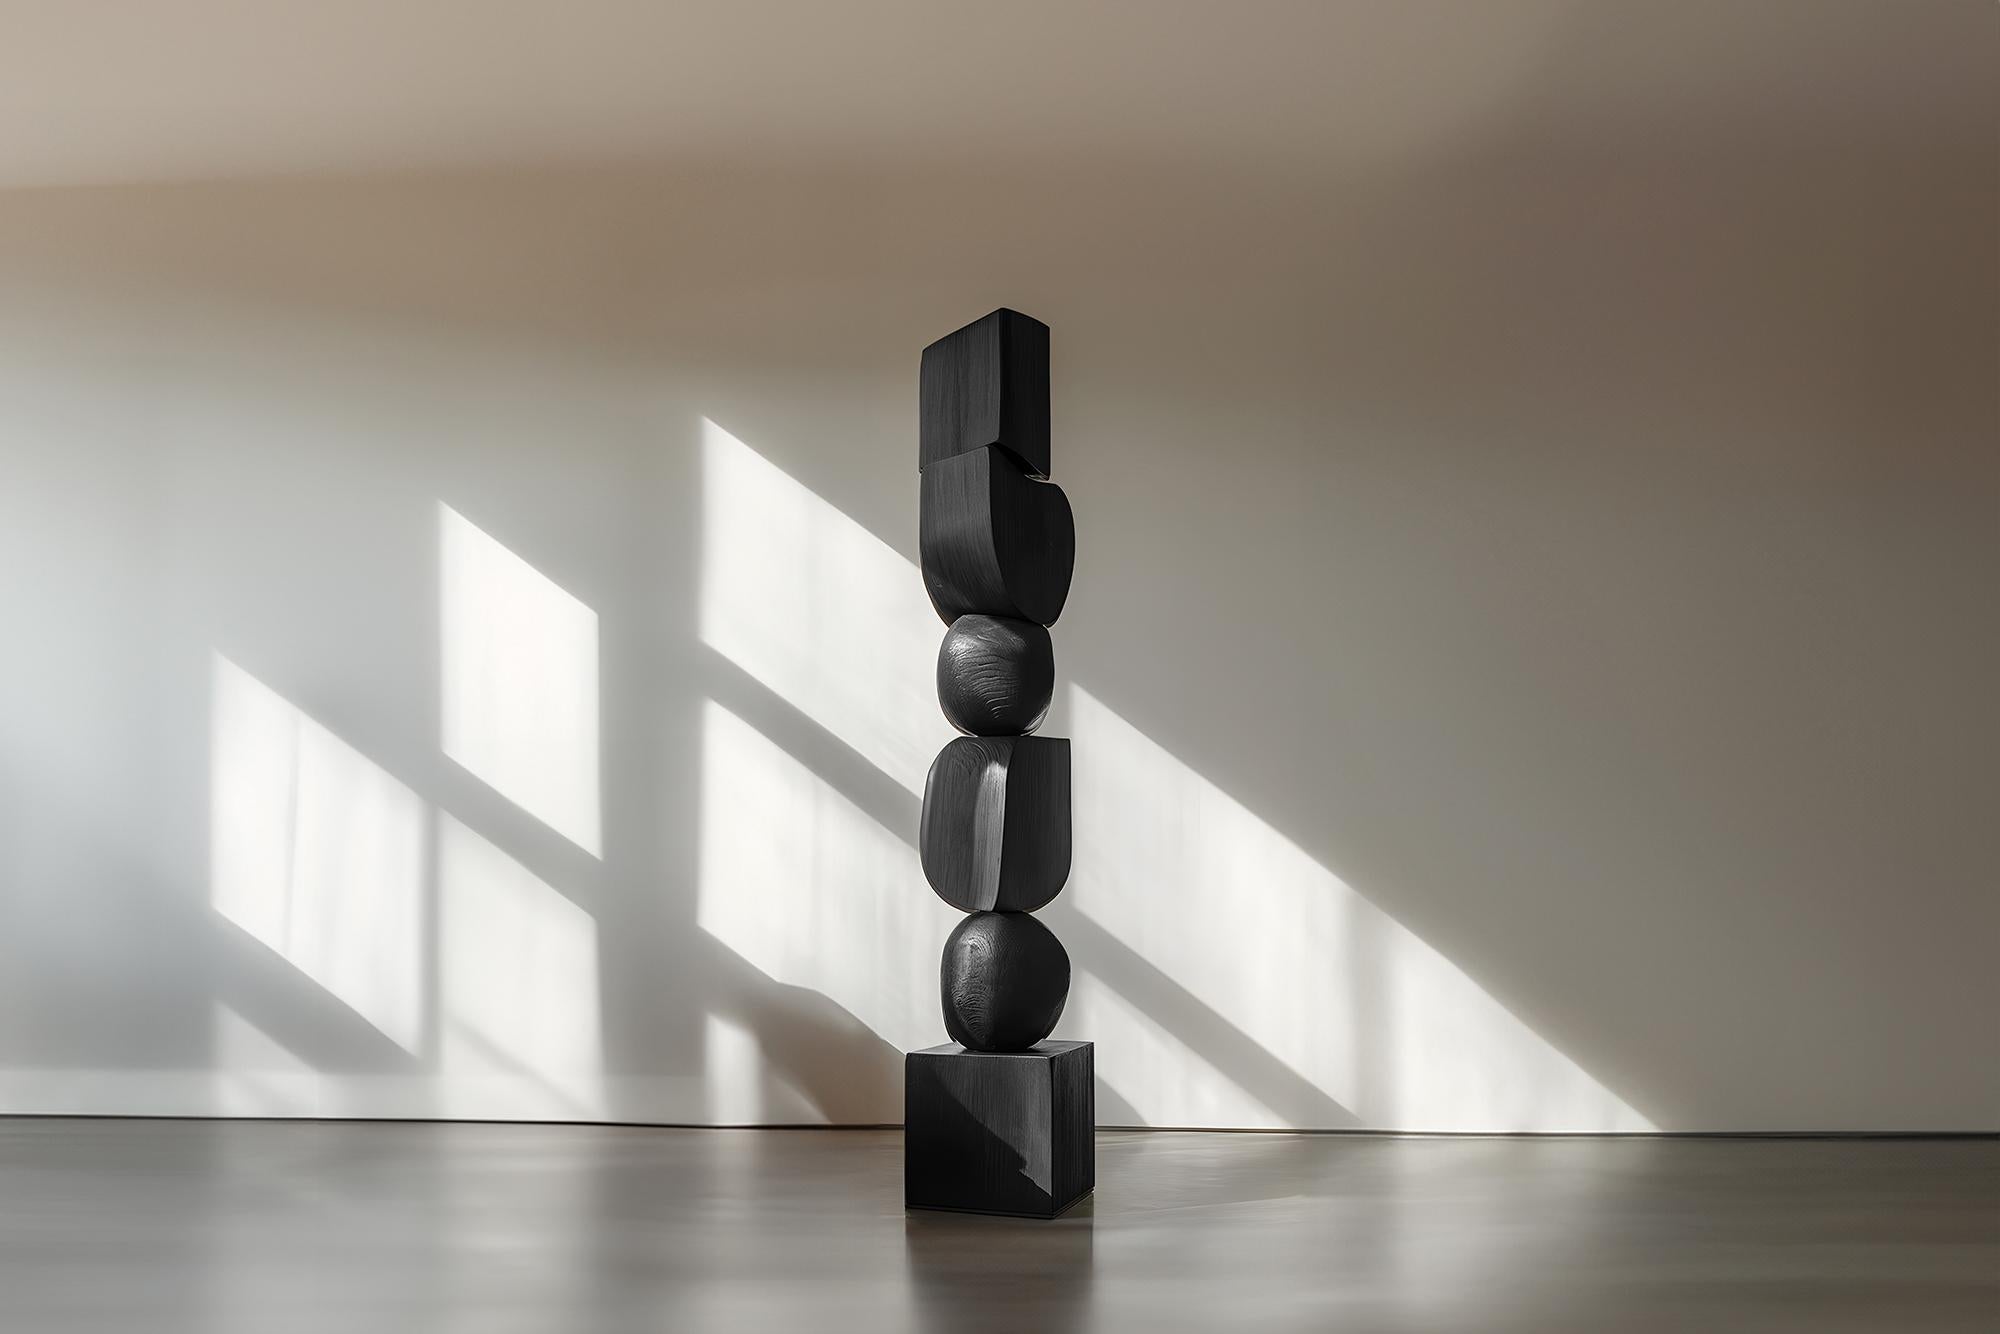 Dark, Elegant Black Solid Wood Design Materializes, Still Stand No91

——

Joel Escalona's wooden standing sculptures are objects of raw beauty and serene grace. Each one is a testament to the power of the material, with smooth curves that flow into